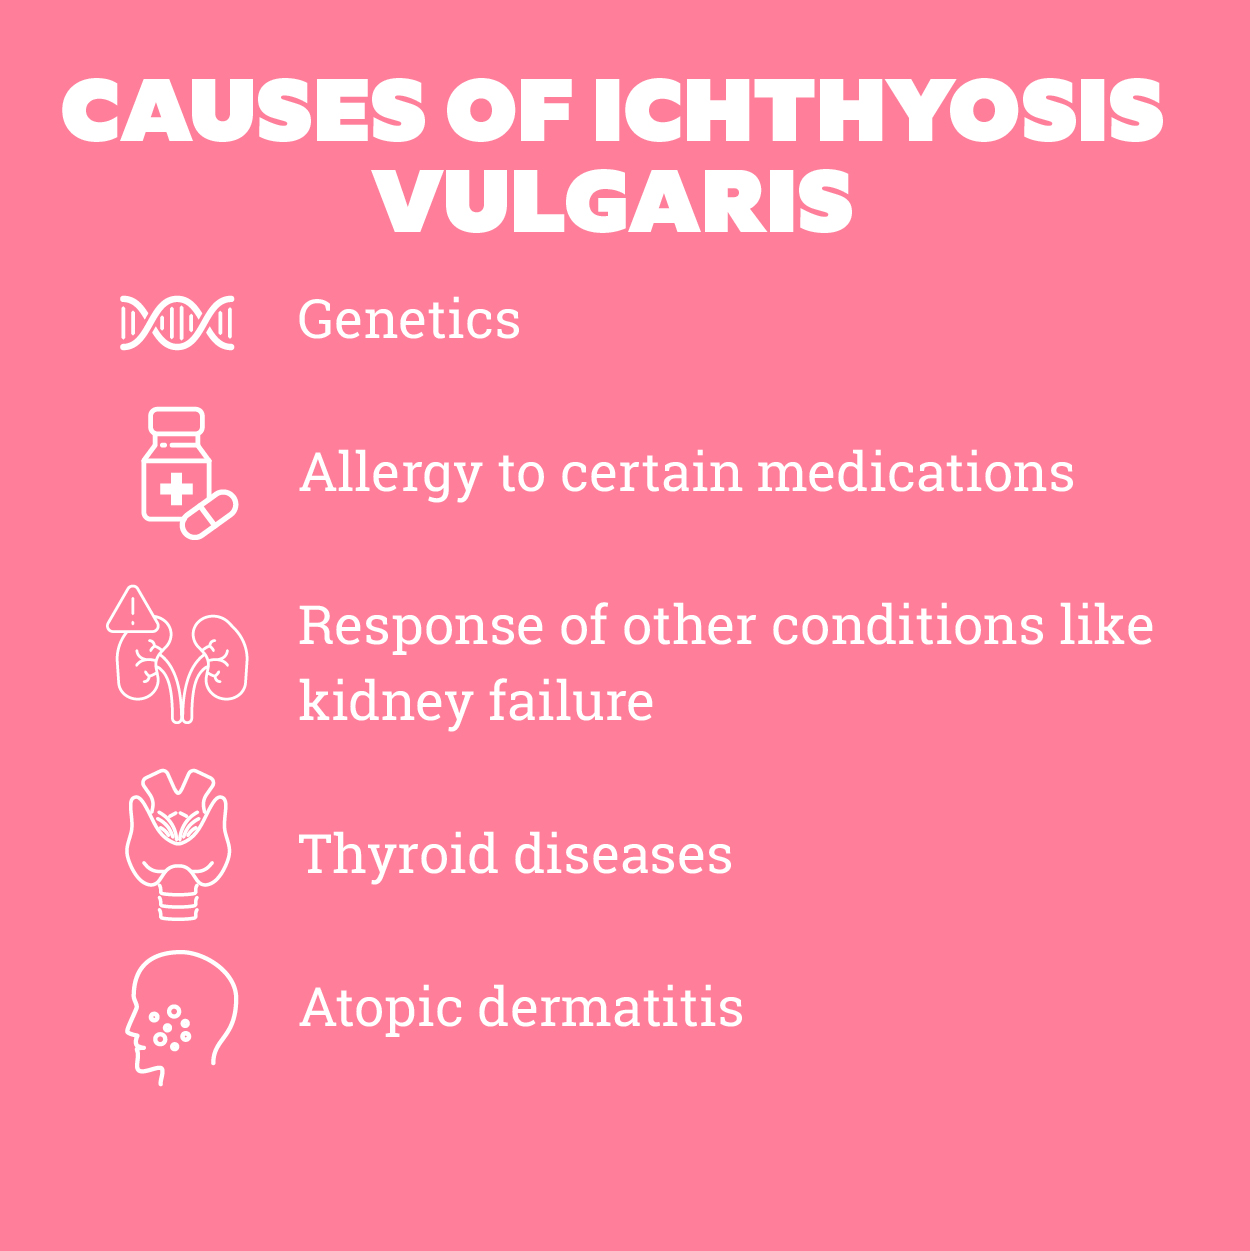 A dermatologist's guide on dealing with Ichthyosis Vulgaris